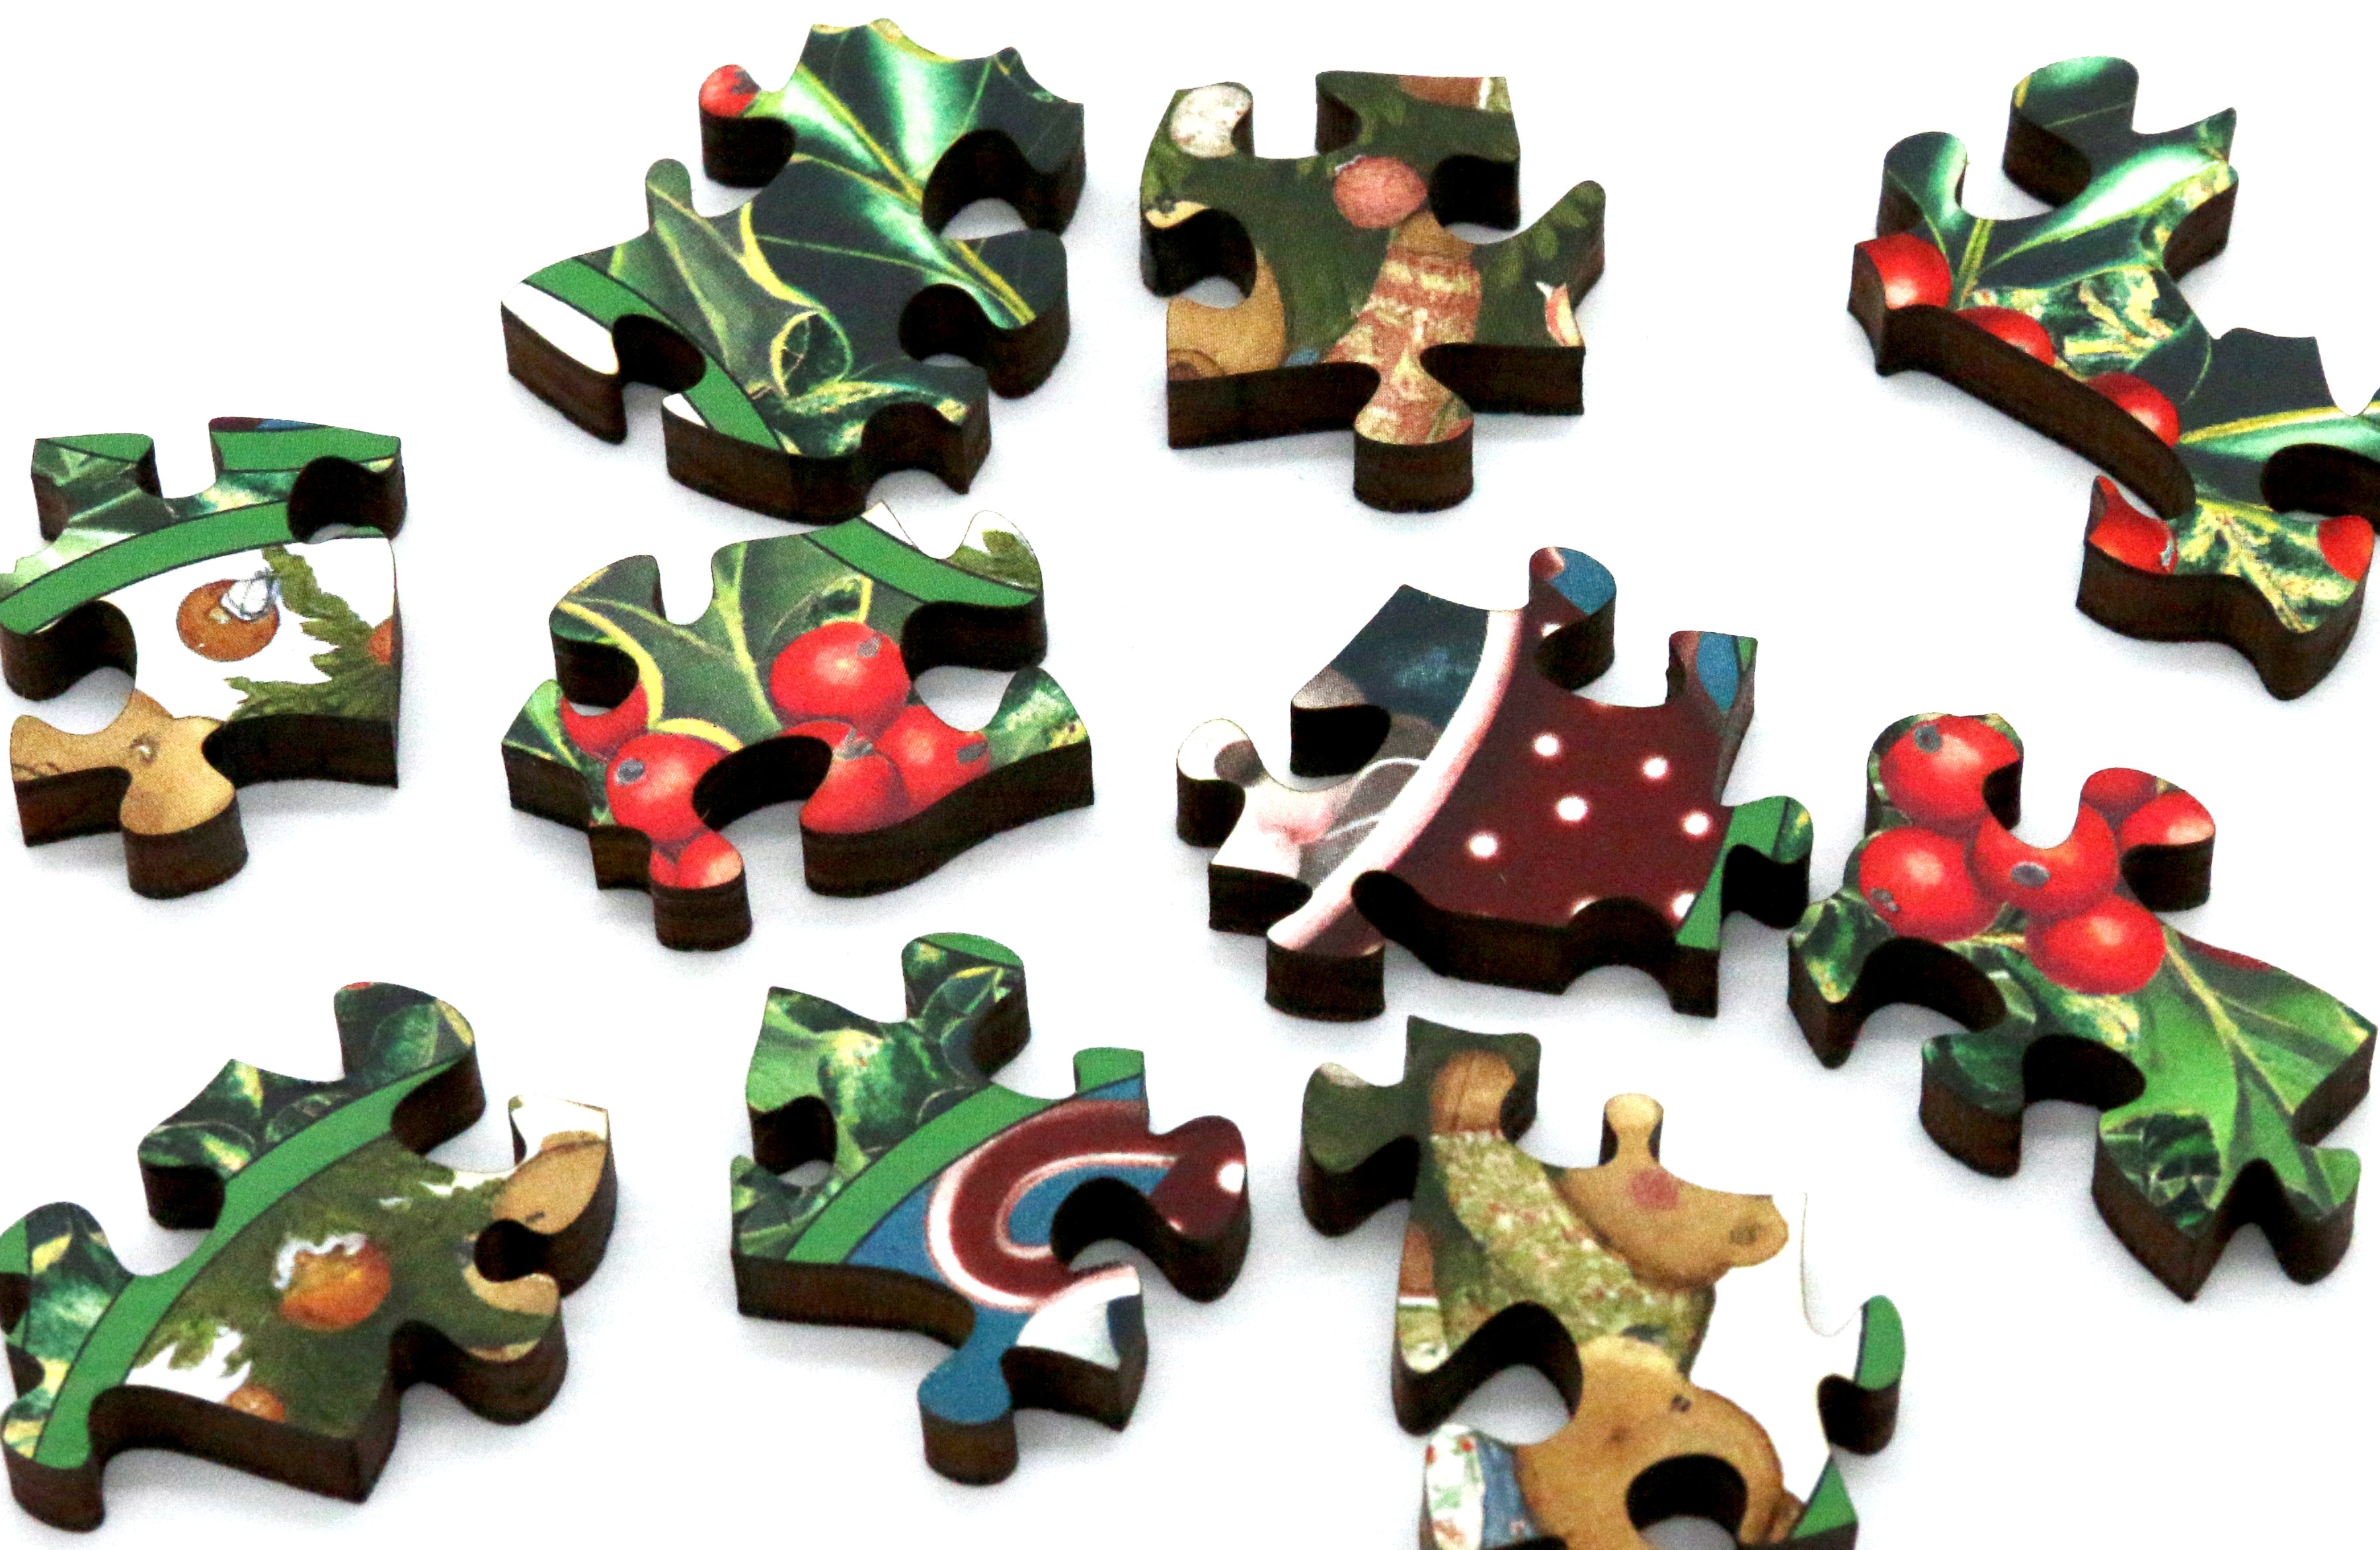 Artifact Puzzles - Six Days Of Holiday Cheer Advent Calendar Wooden Jigsaw Puzzle